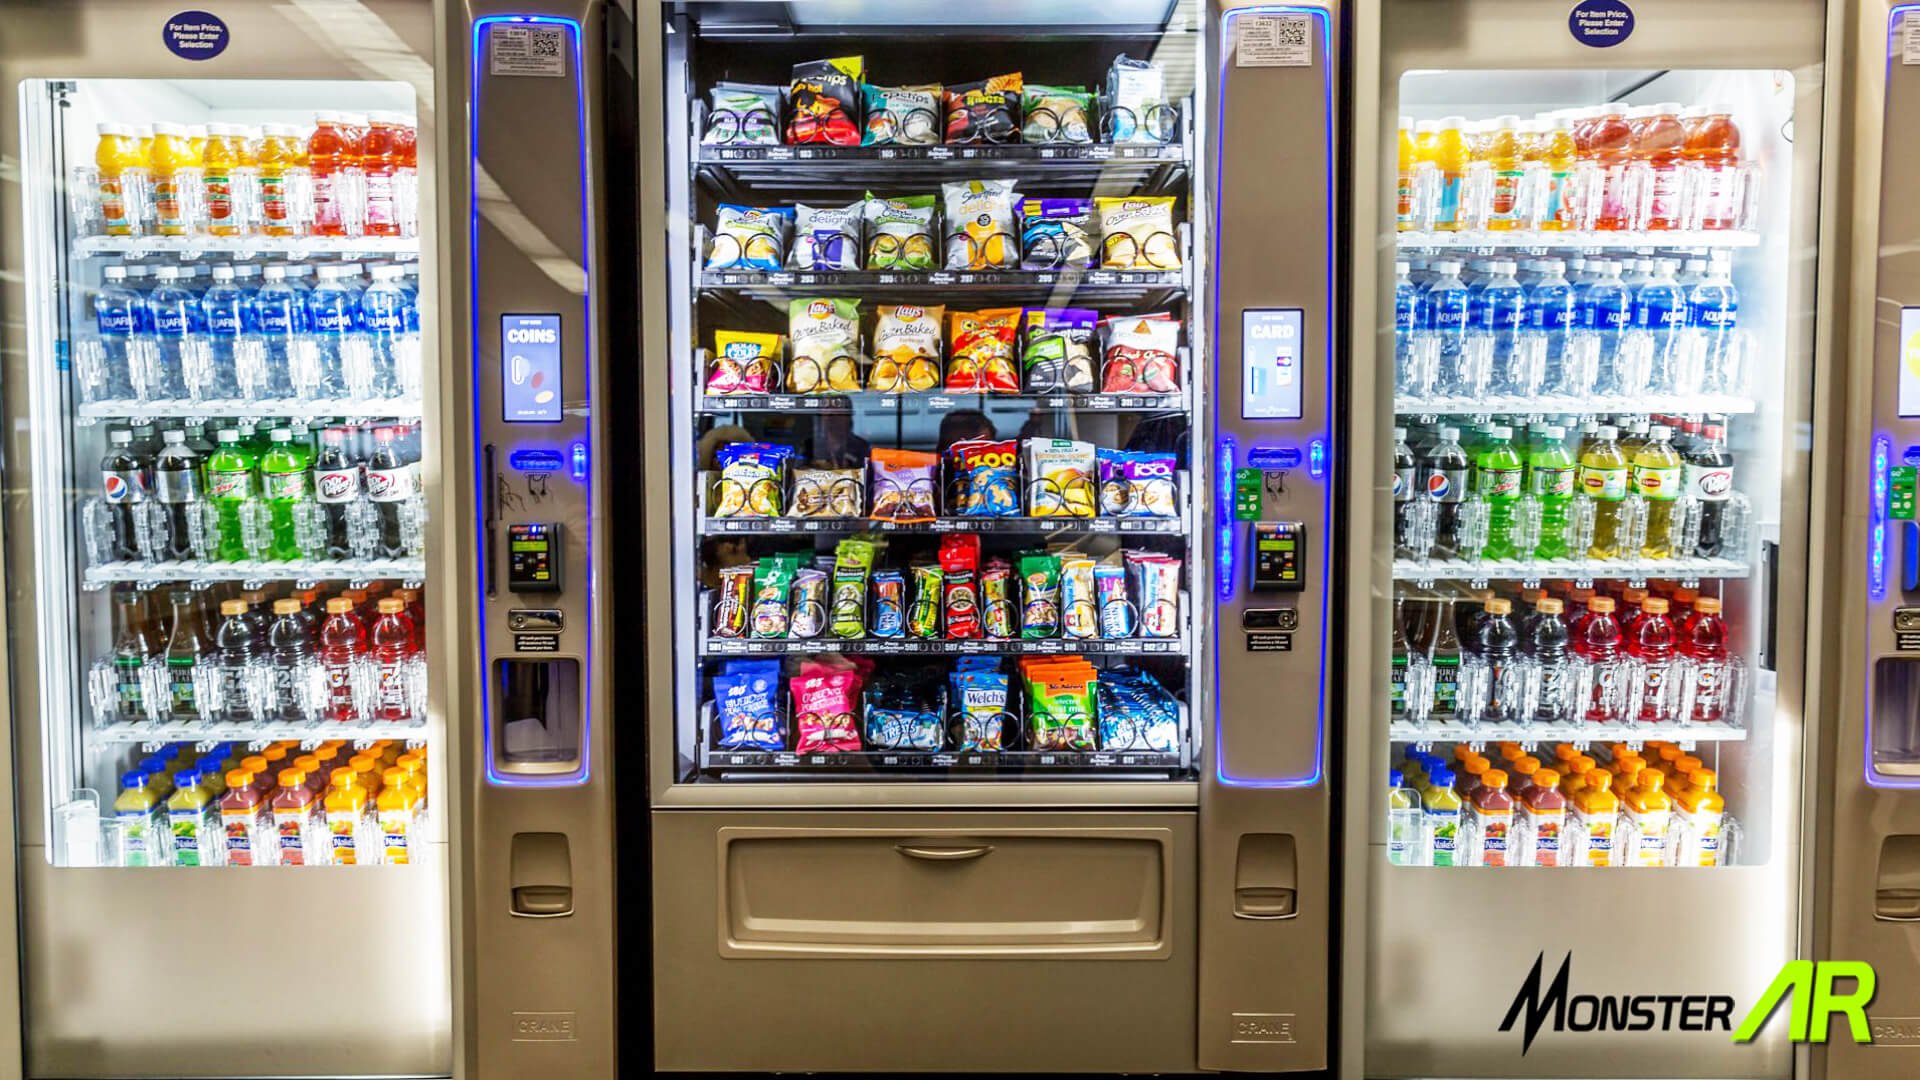 Which Payment Methods Do You Prefer the Vending Machine To Take?